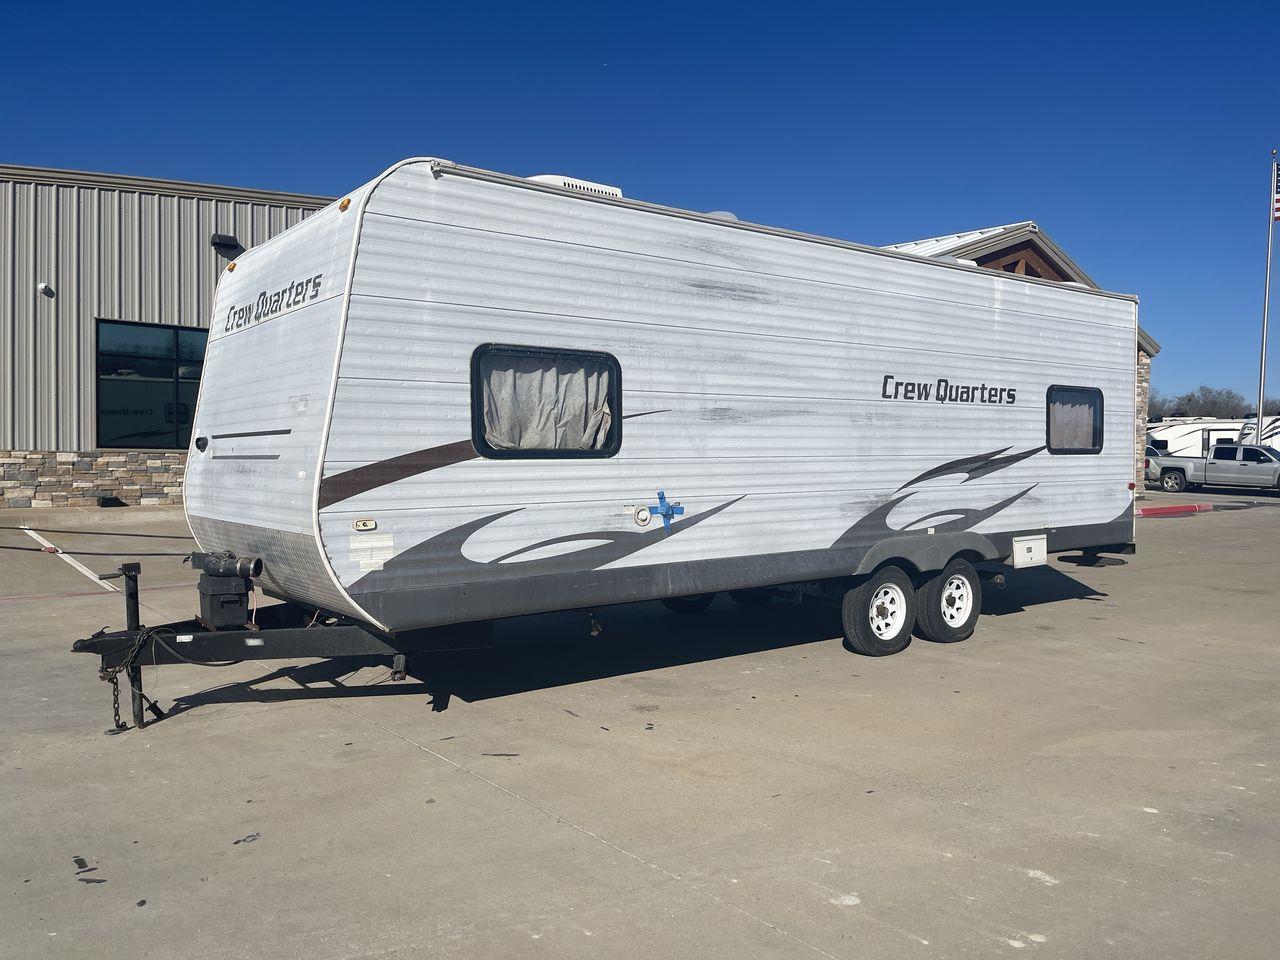 2010 WHITE FOREST RIVER CREW QUARTERS T24-2 - (4X4TWDZ21AR) , Dry Weight: 5,275 lbs | Gross Weight: 7,713 lbs | Slides: 0 transmission, located at 4319 N Main St, Cleburne, TX, 76033, (817) 678-5133, 32.385960, -97.391212 - Photo #19